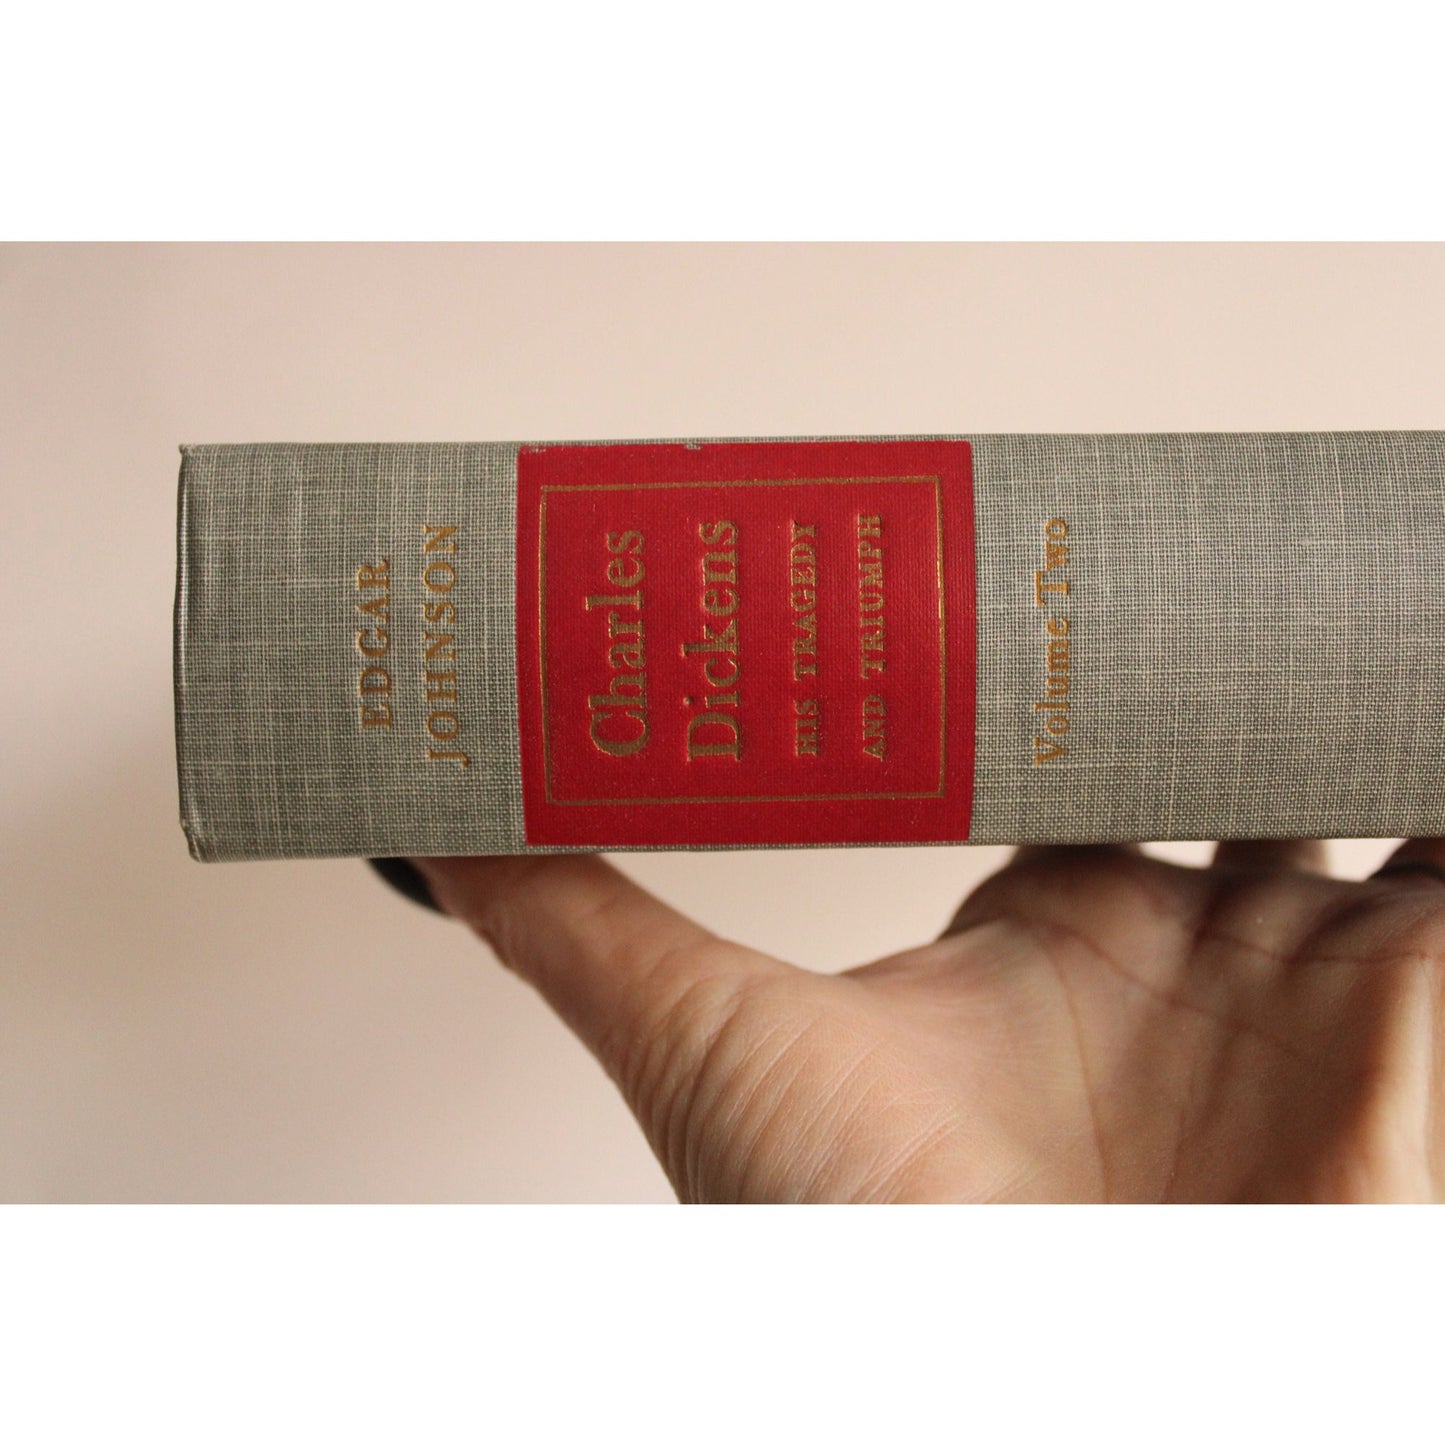 Vintage 1950s Book, "Charles Dickens, His Tragedy and Triumph" Volume Two, by Edgard Johnson